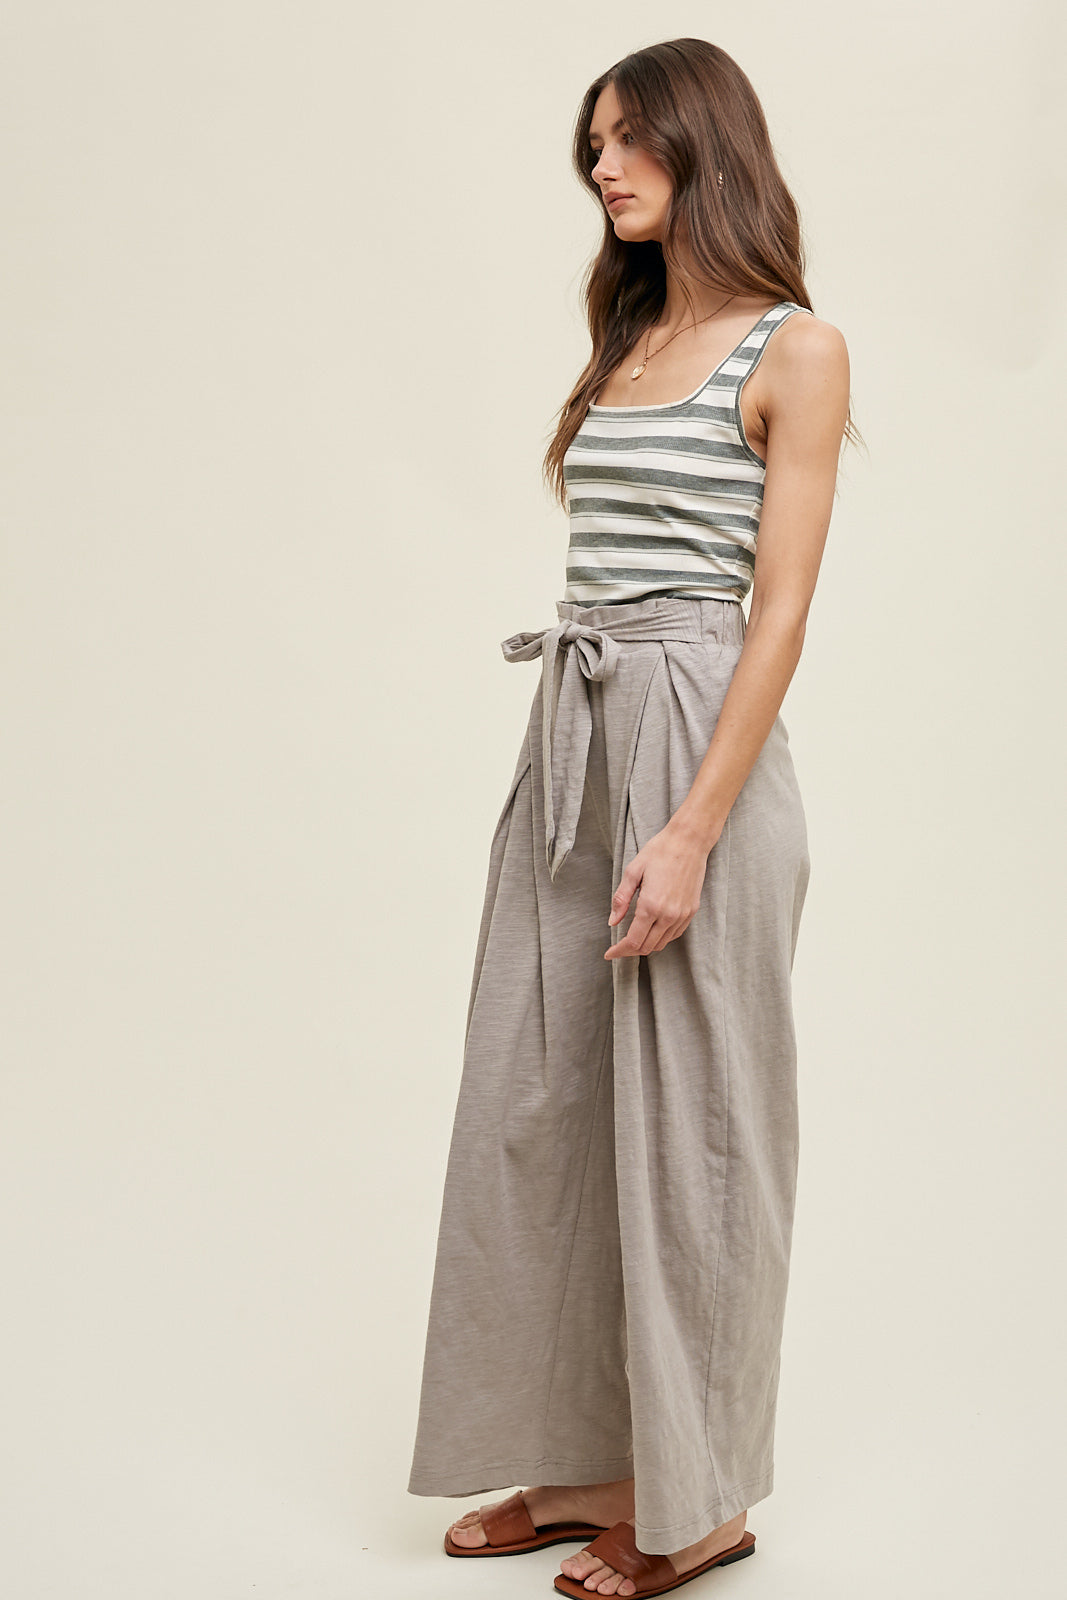 The Polly Striped Tank